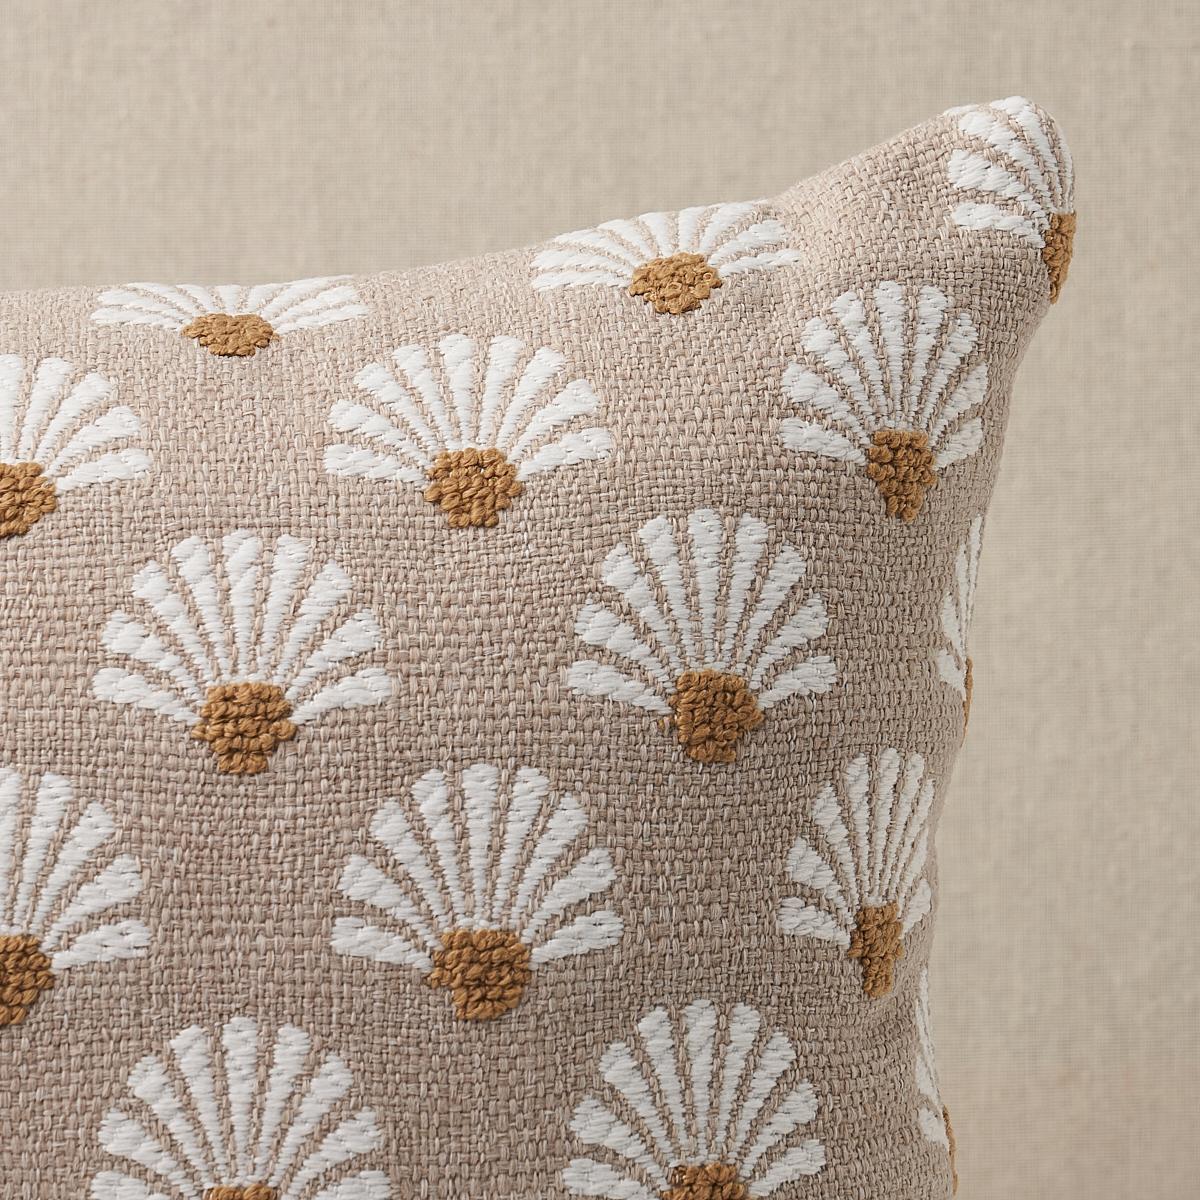 This pillow features Bellini Indoor/Outdoor with a knife edge finish. Soft bouclé yarns give this chic small-scale scallop pattern its fabulous texture, unique dimension and lovely hand. Pillow includes a polyfill insert and hidden zipper closure.